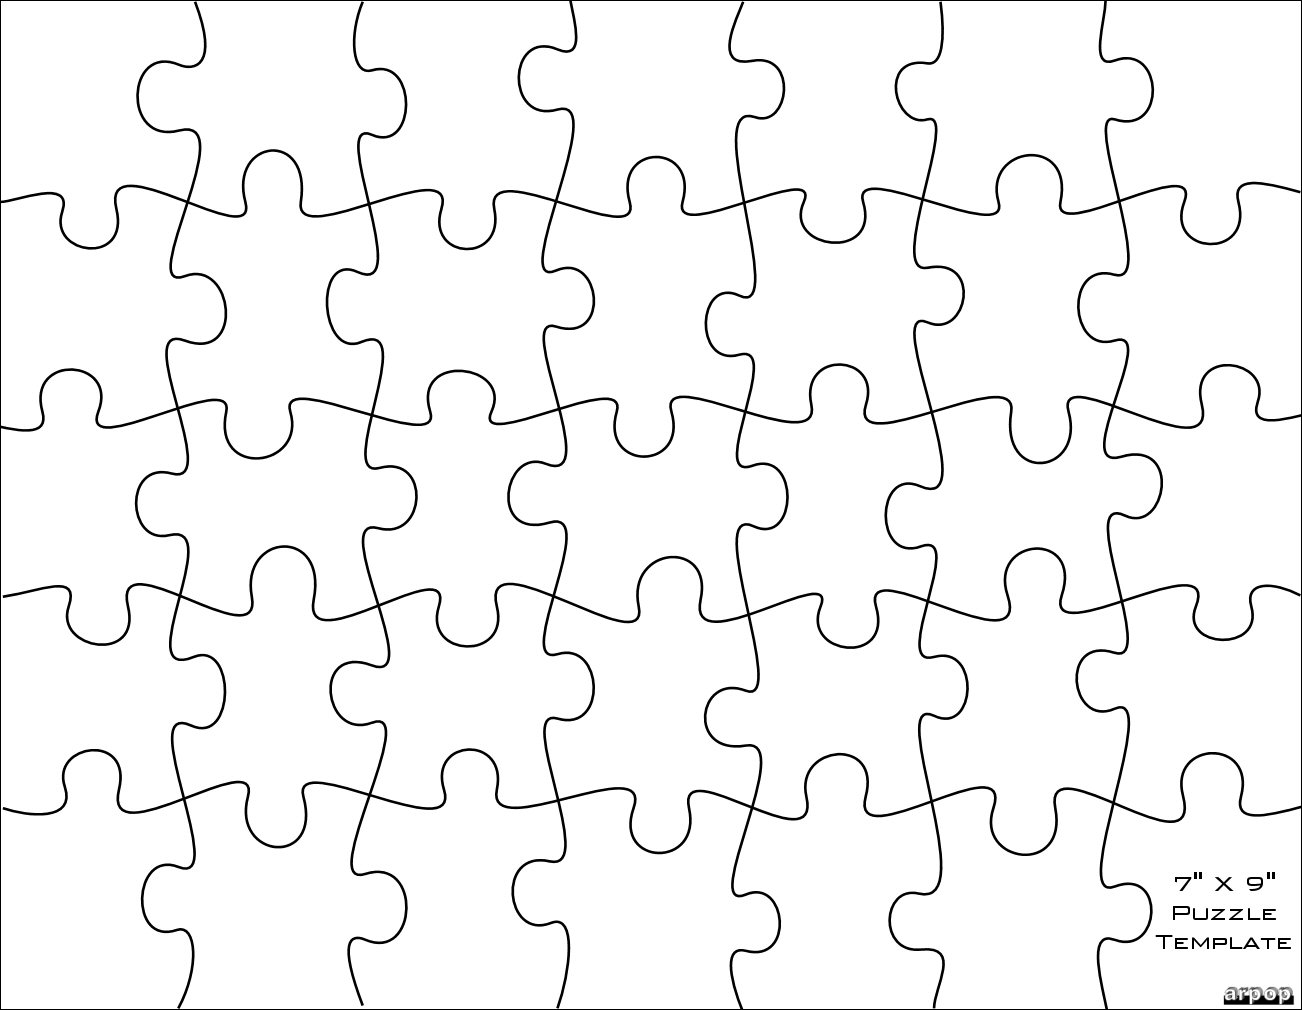 free-puzzle-template-download-free-puzzle-template-png-images-free-cliparts-on-clipart-library